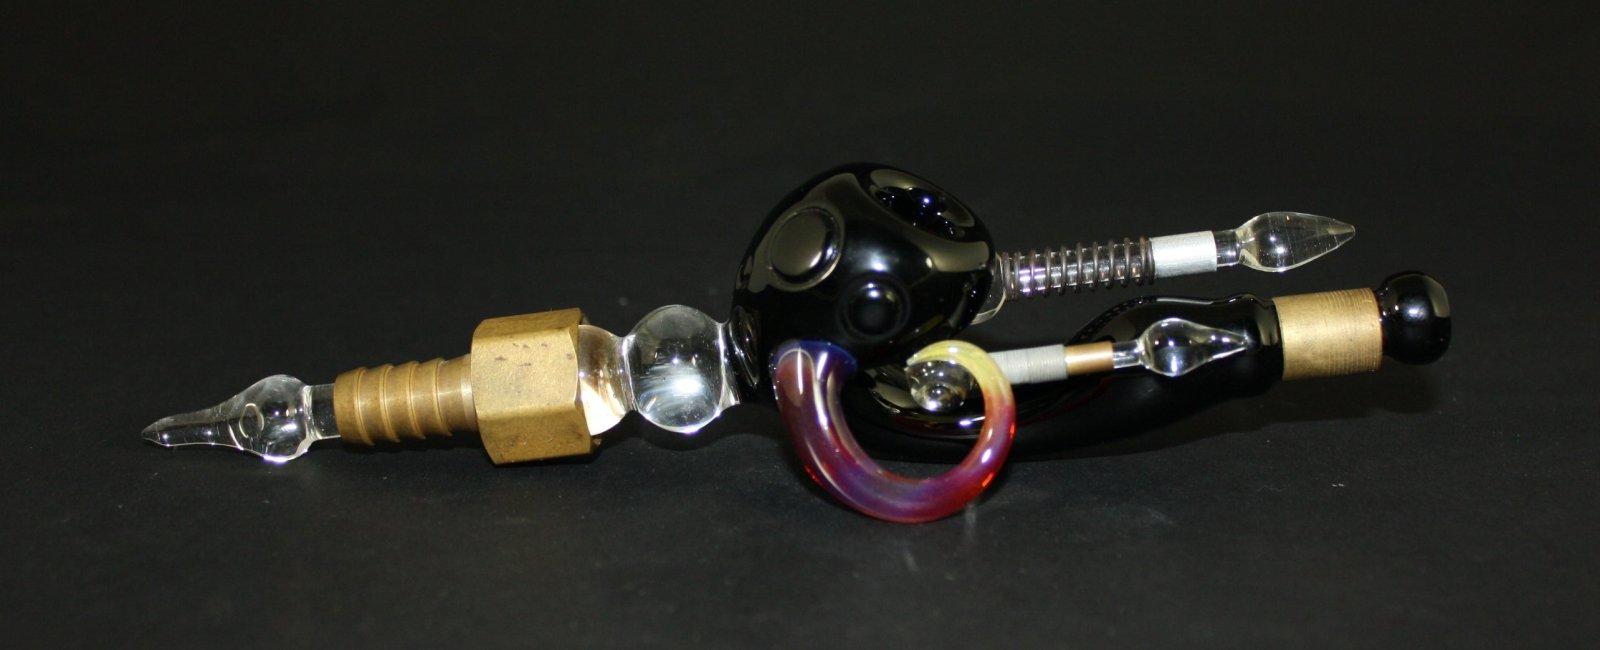 Bearclaw - Dry Pipe - @Ryanbearclaw - HG